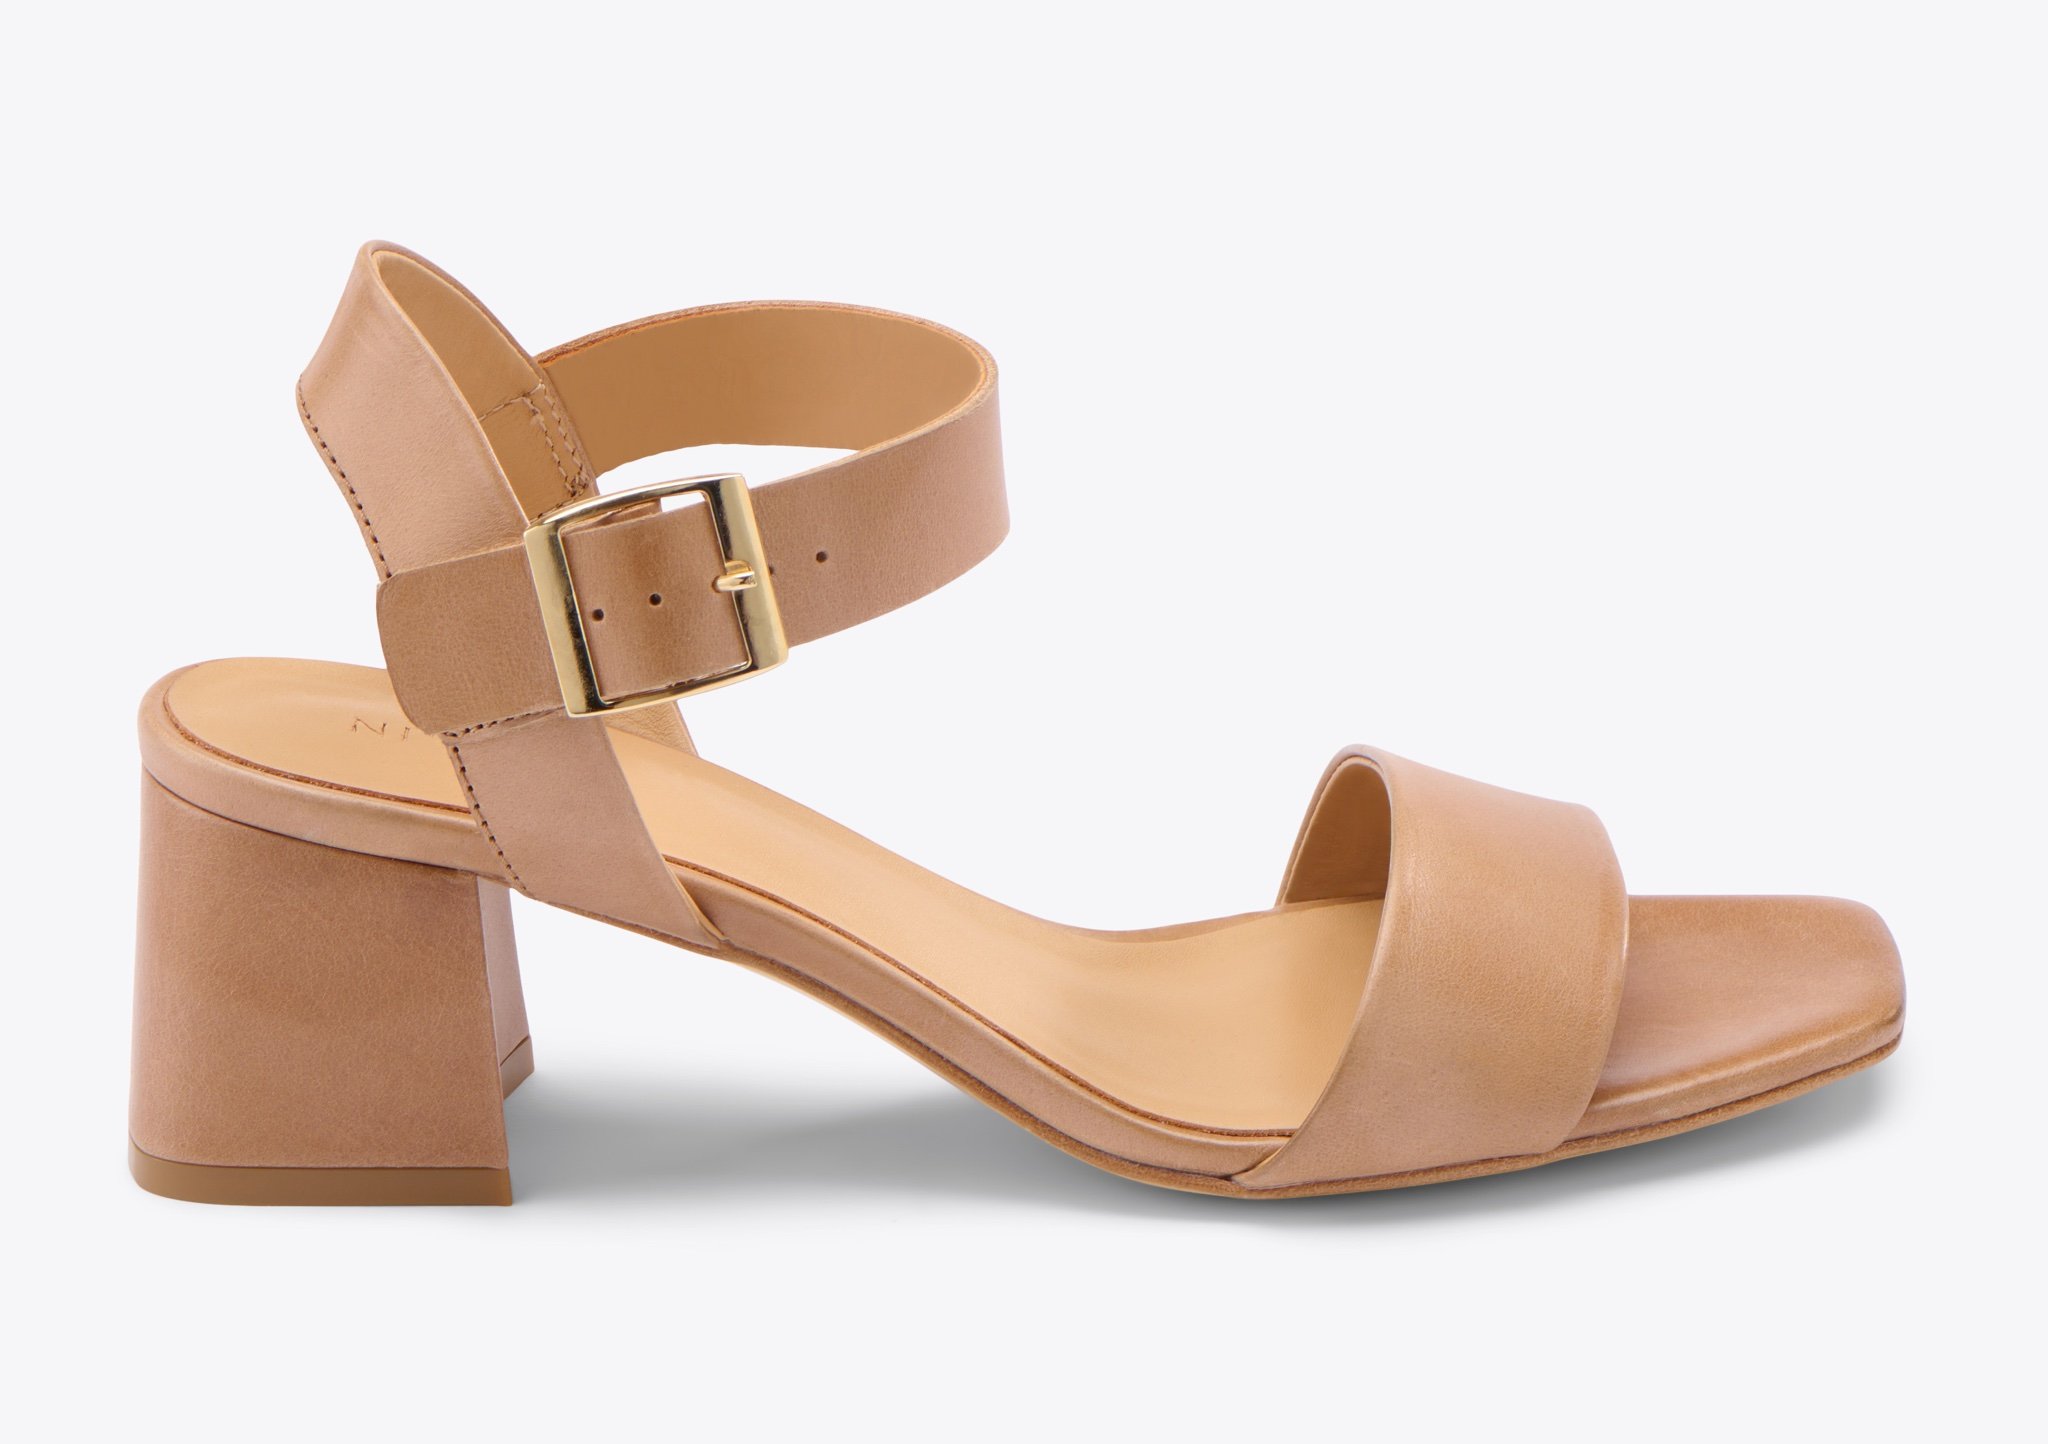 Nisolo Stella Go-To Block Heel Sandal Almond - Every Nisolo product is built on the foundation of comfort, function, and design. 